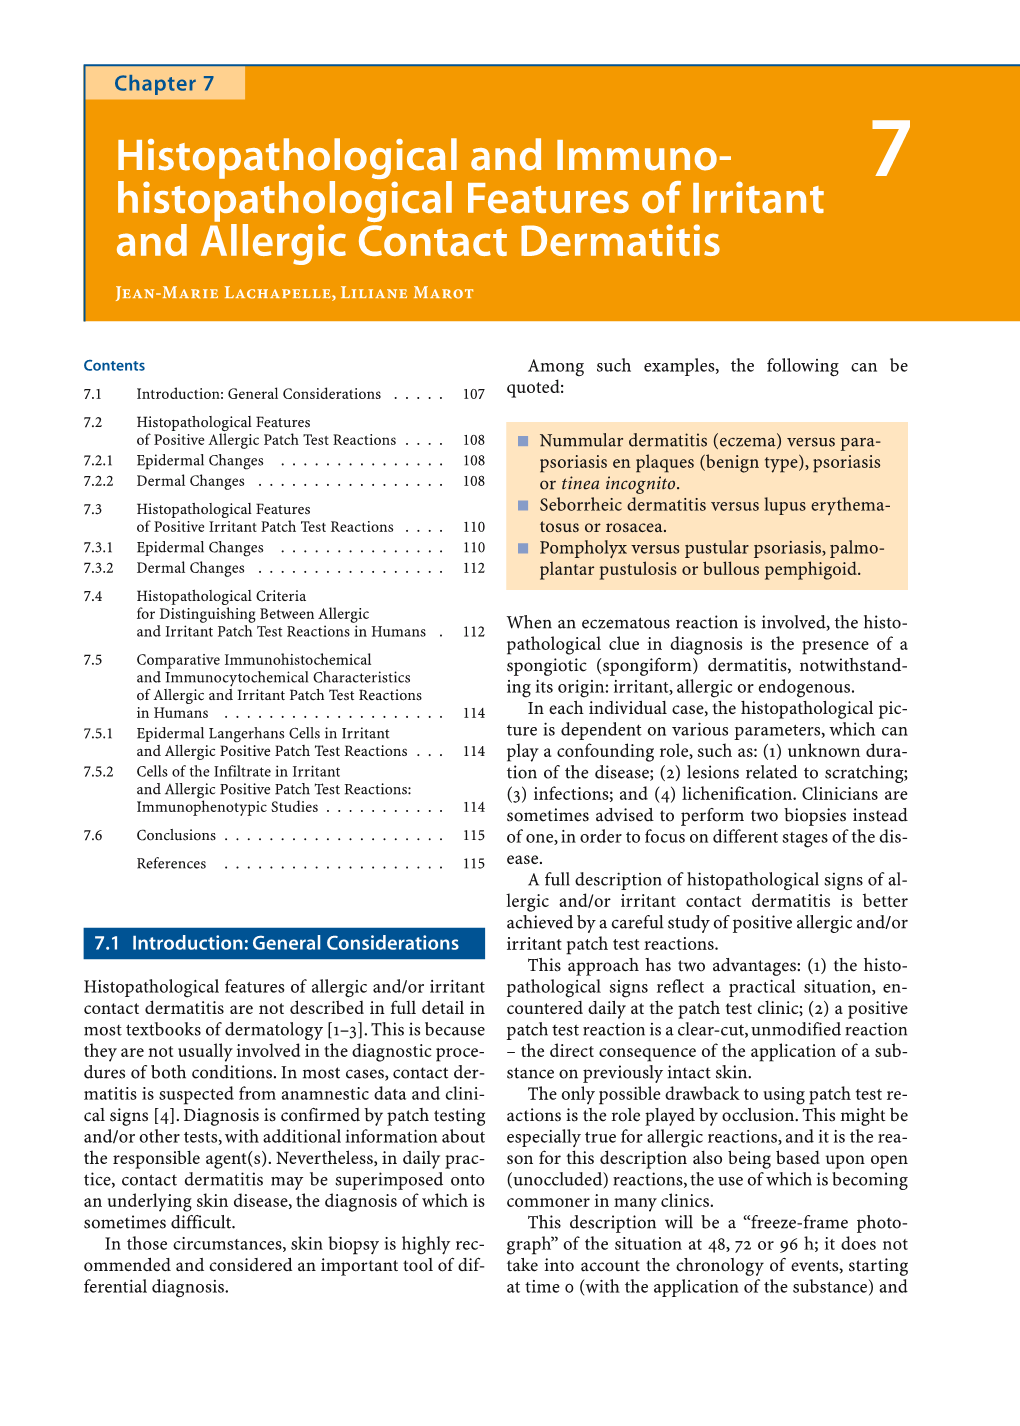 Histopathological and Immuno- Histopathological Features of Irritant and Allergic Contact Dermatitis